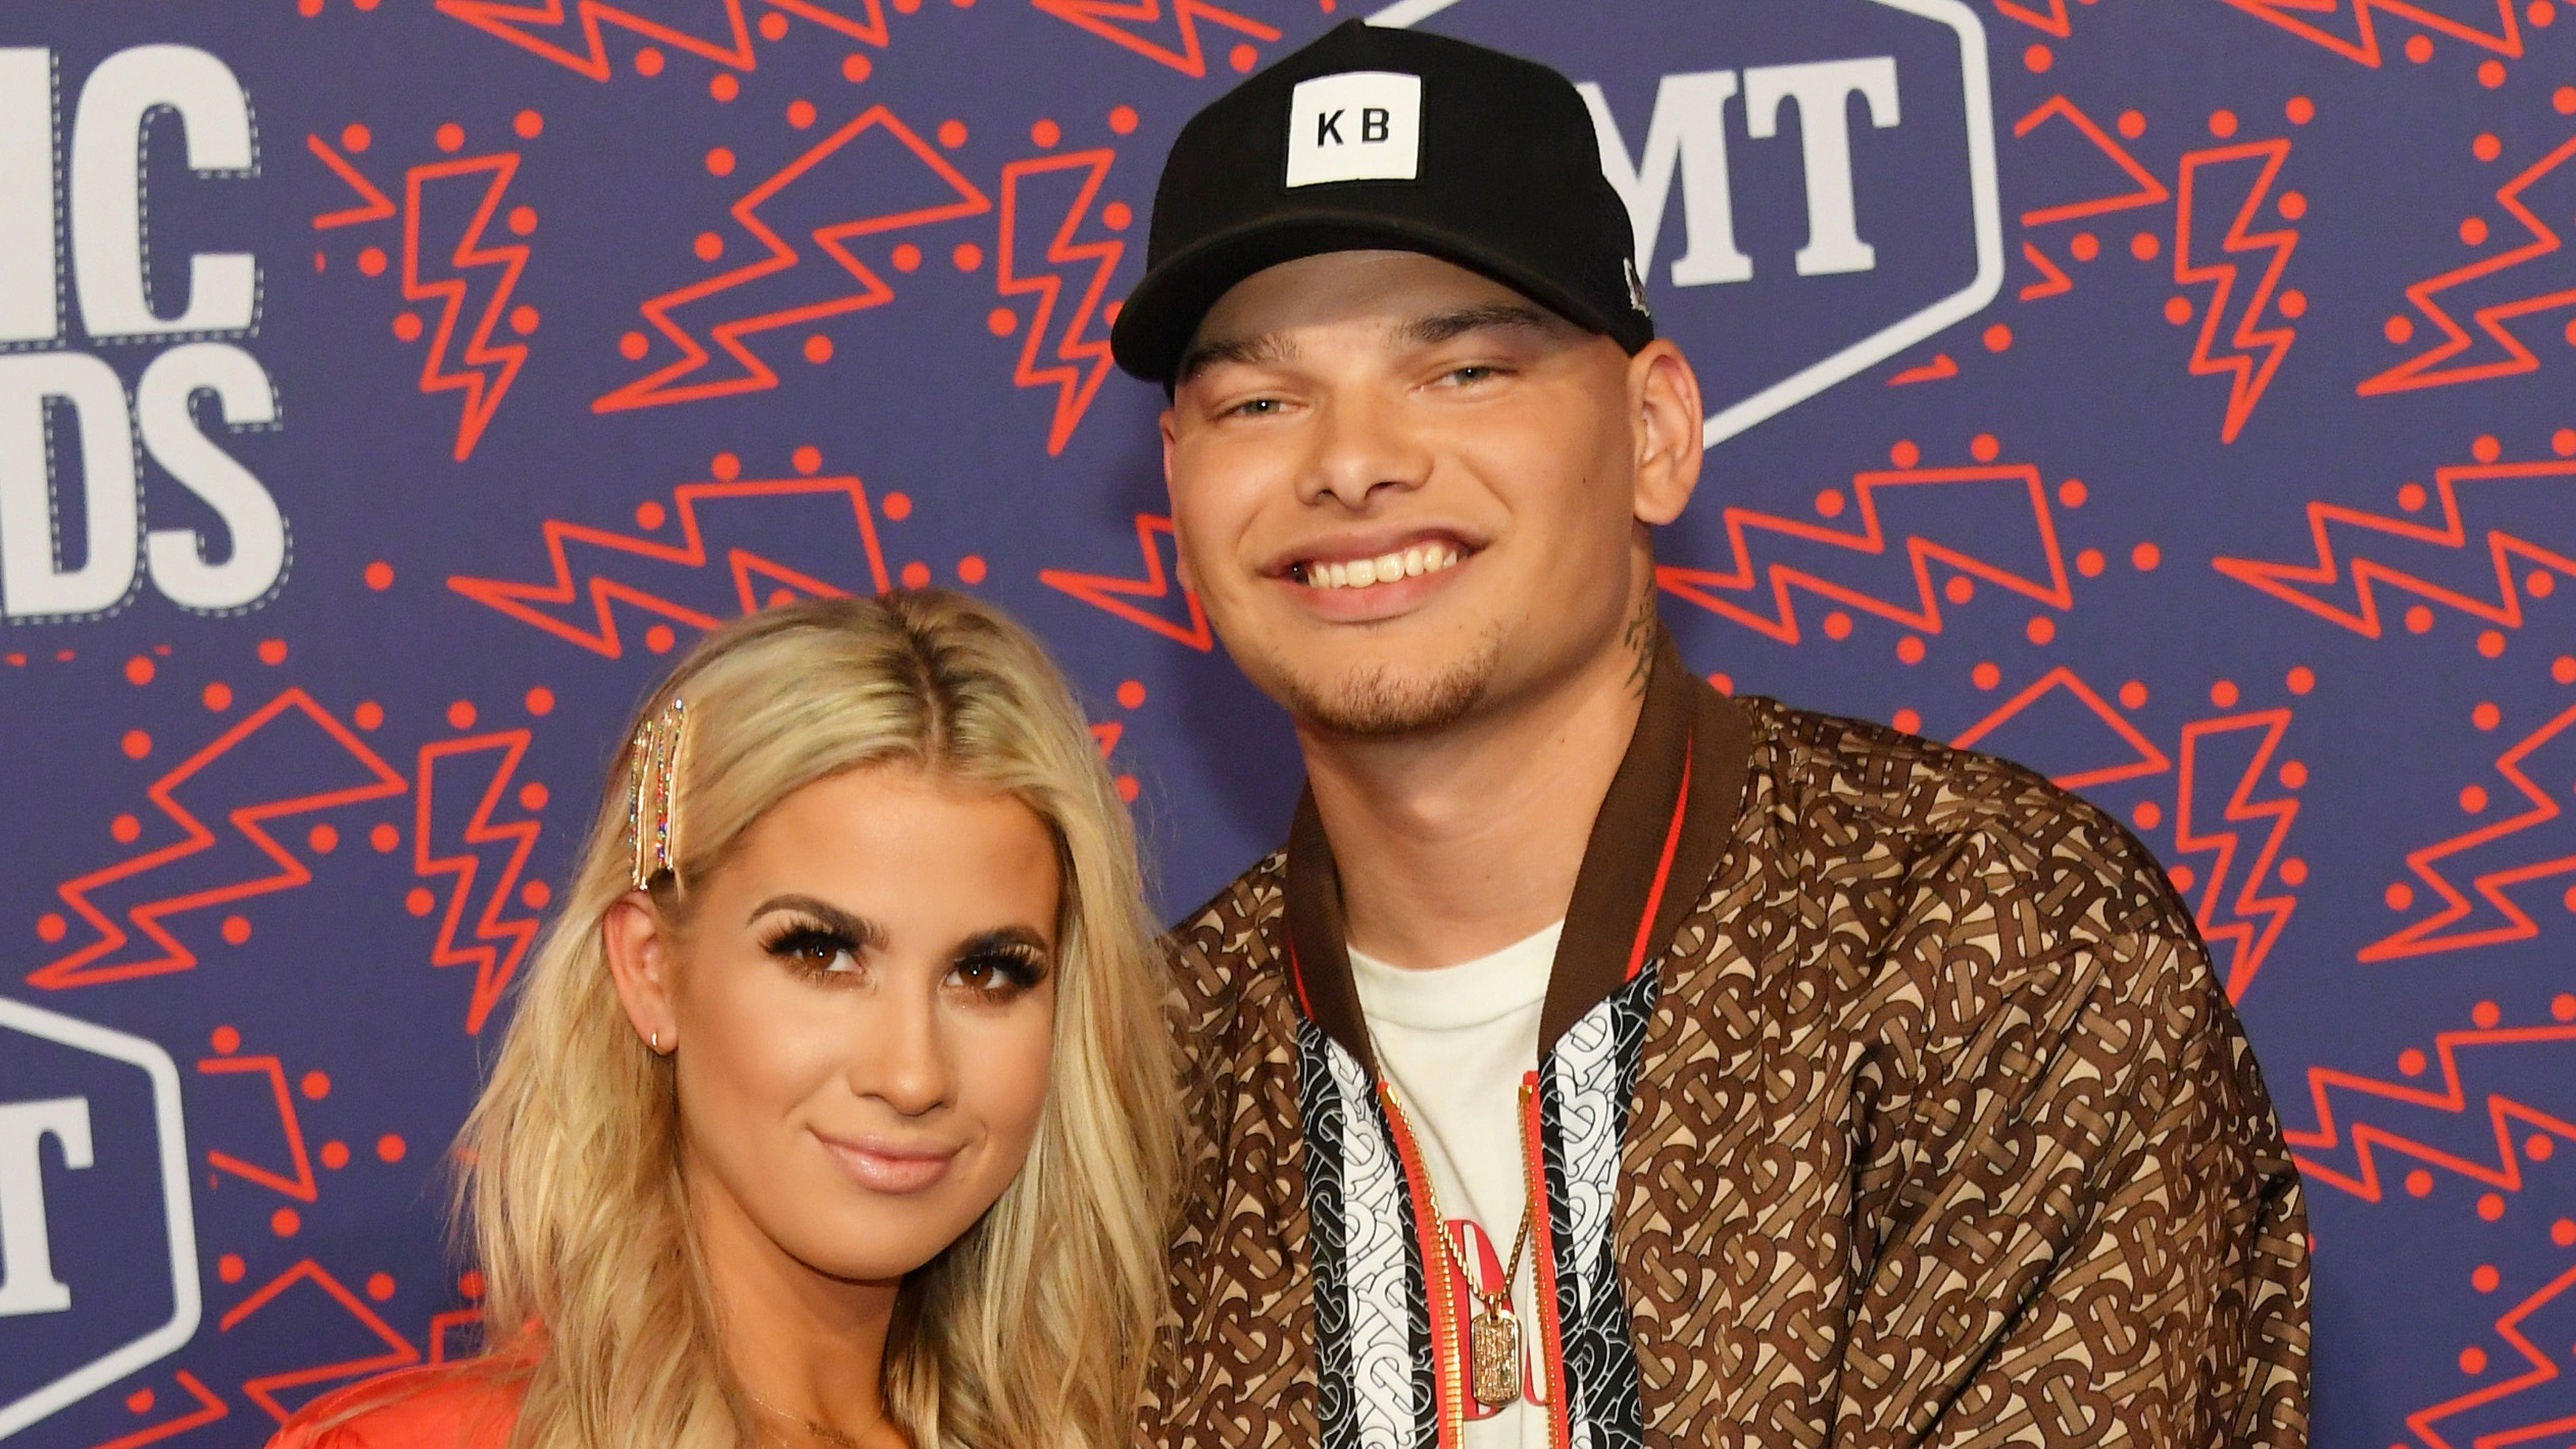 Kane Brown Welcomes First Child With Wife Katelyn - See the Pic!